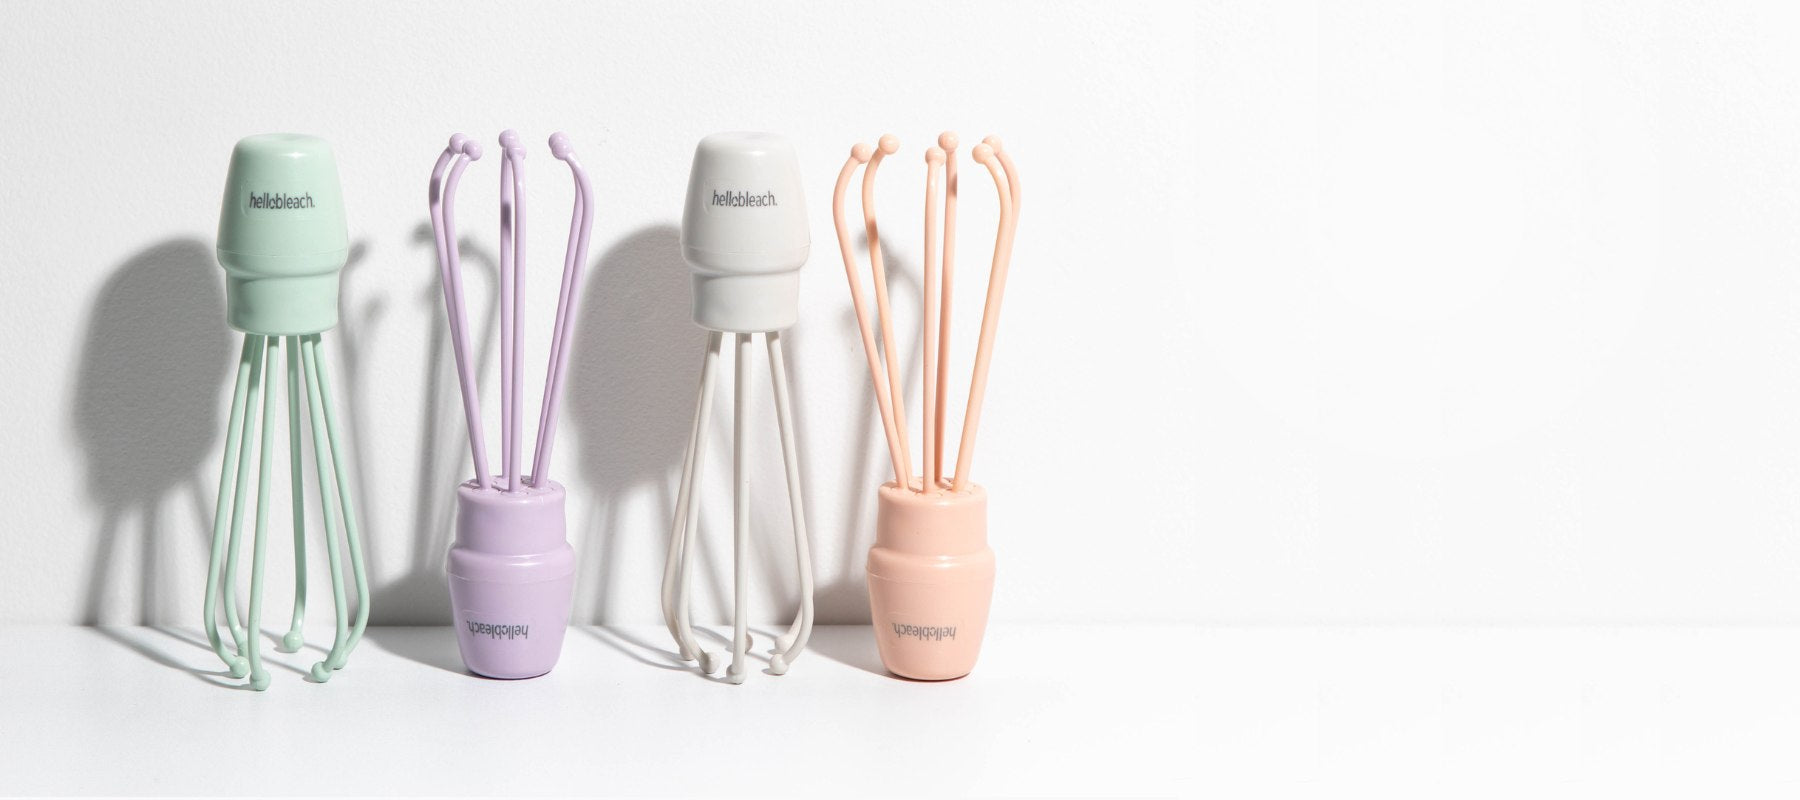 Hello Bleach NEW Sustainable Hardware Collection for Hairdressers - Recycled Plastic Salon Tools